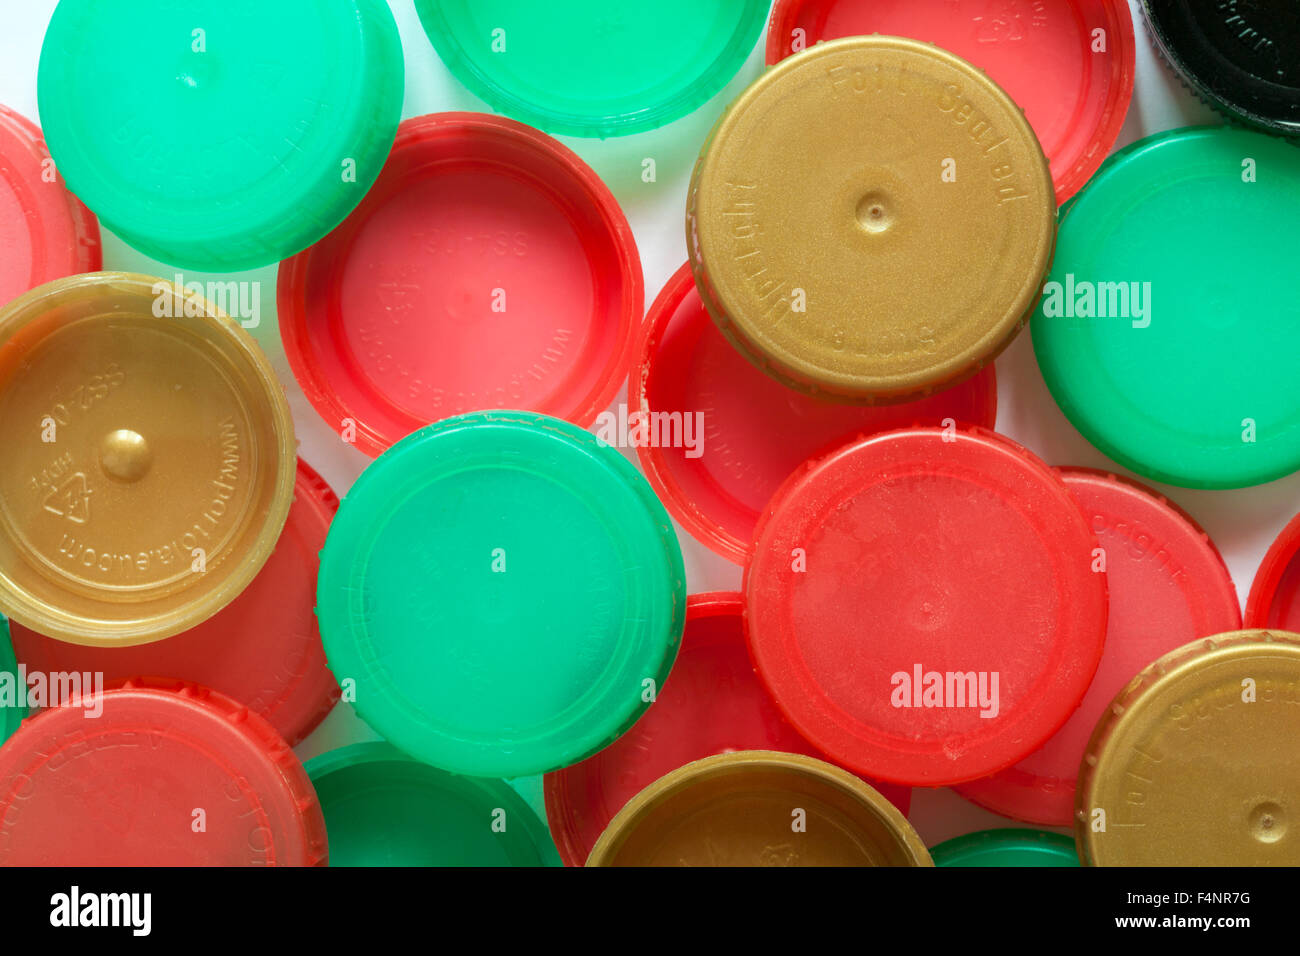 red and green plastic milk bottle tops and gold bottle tops - HDPE high density polyethylene Stock Photo